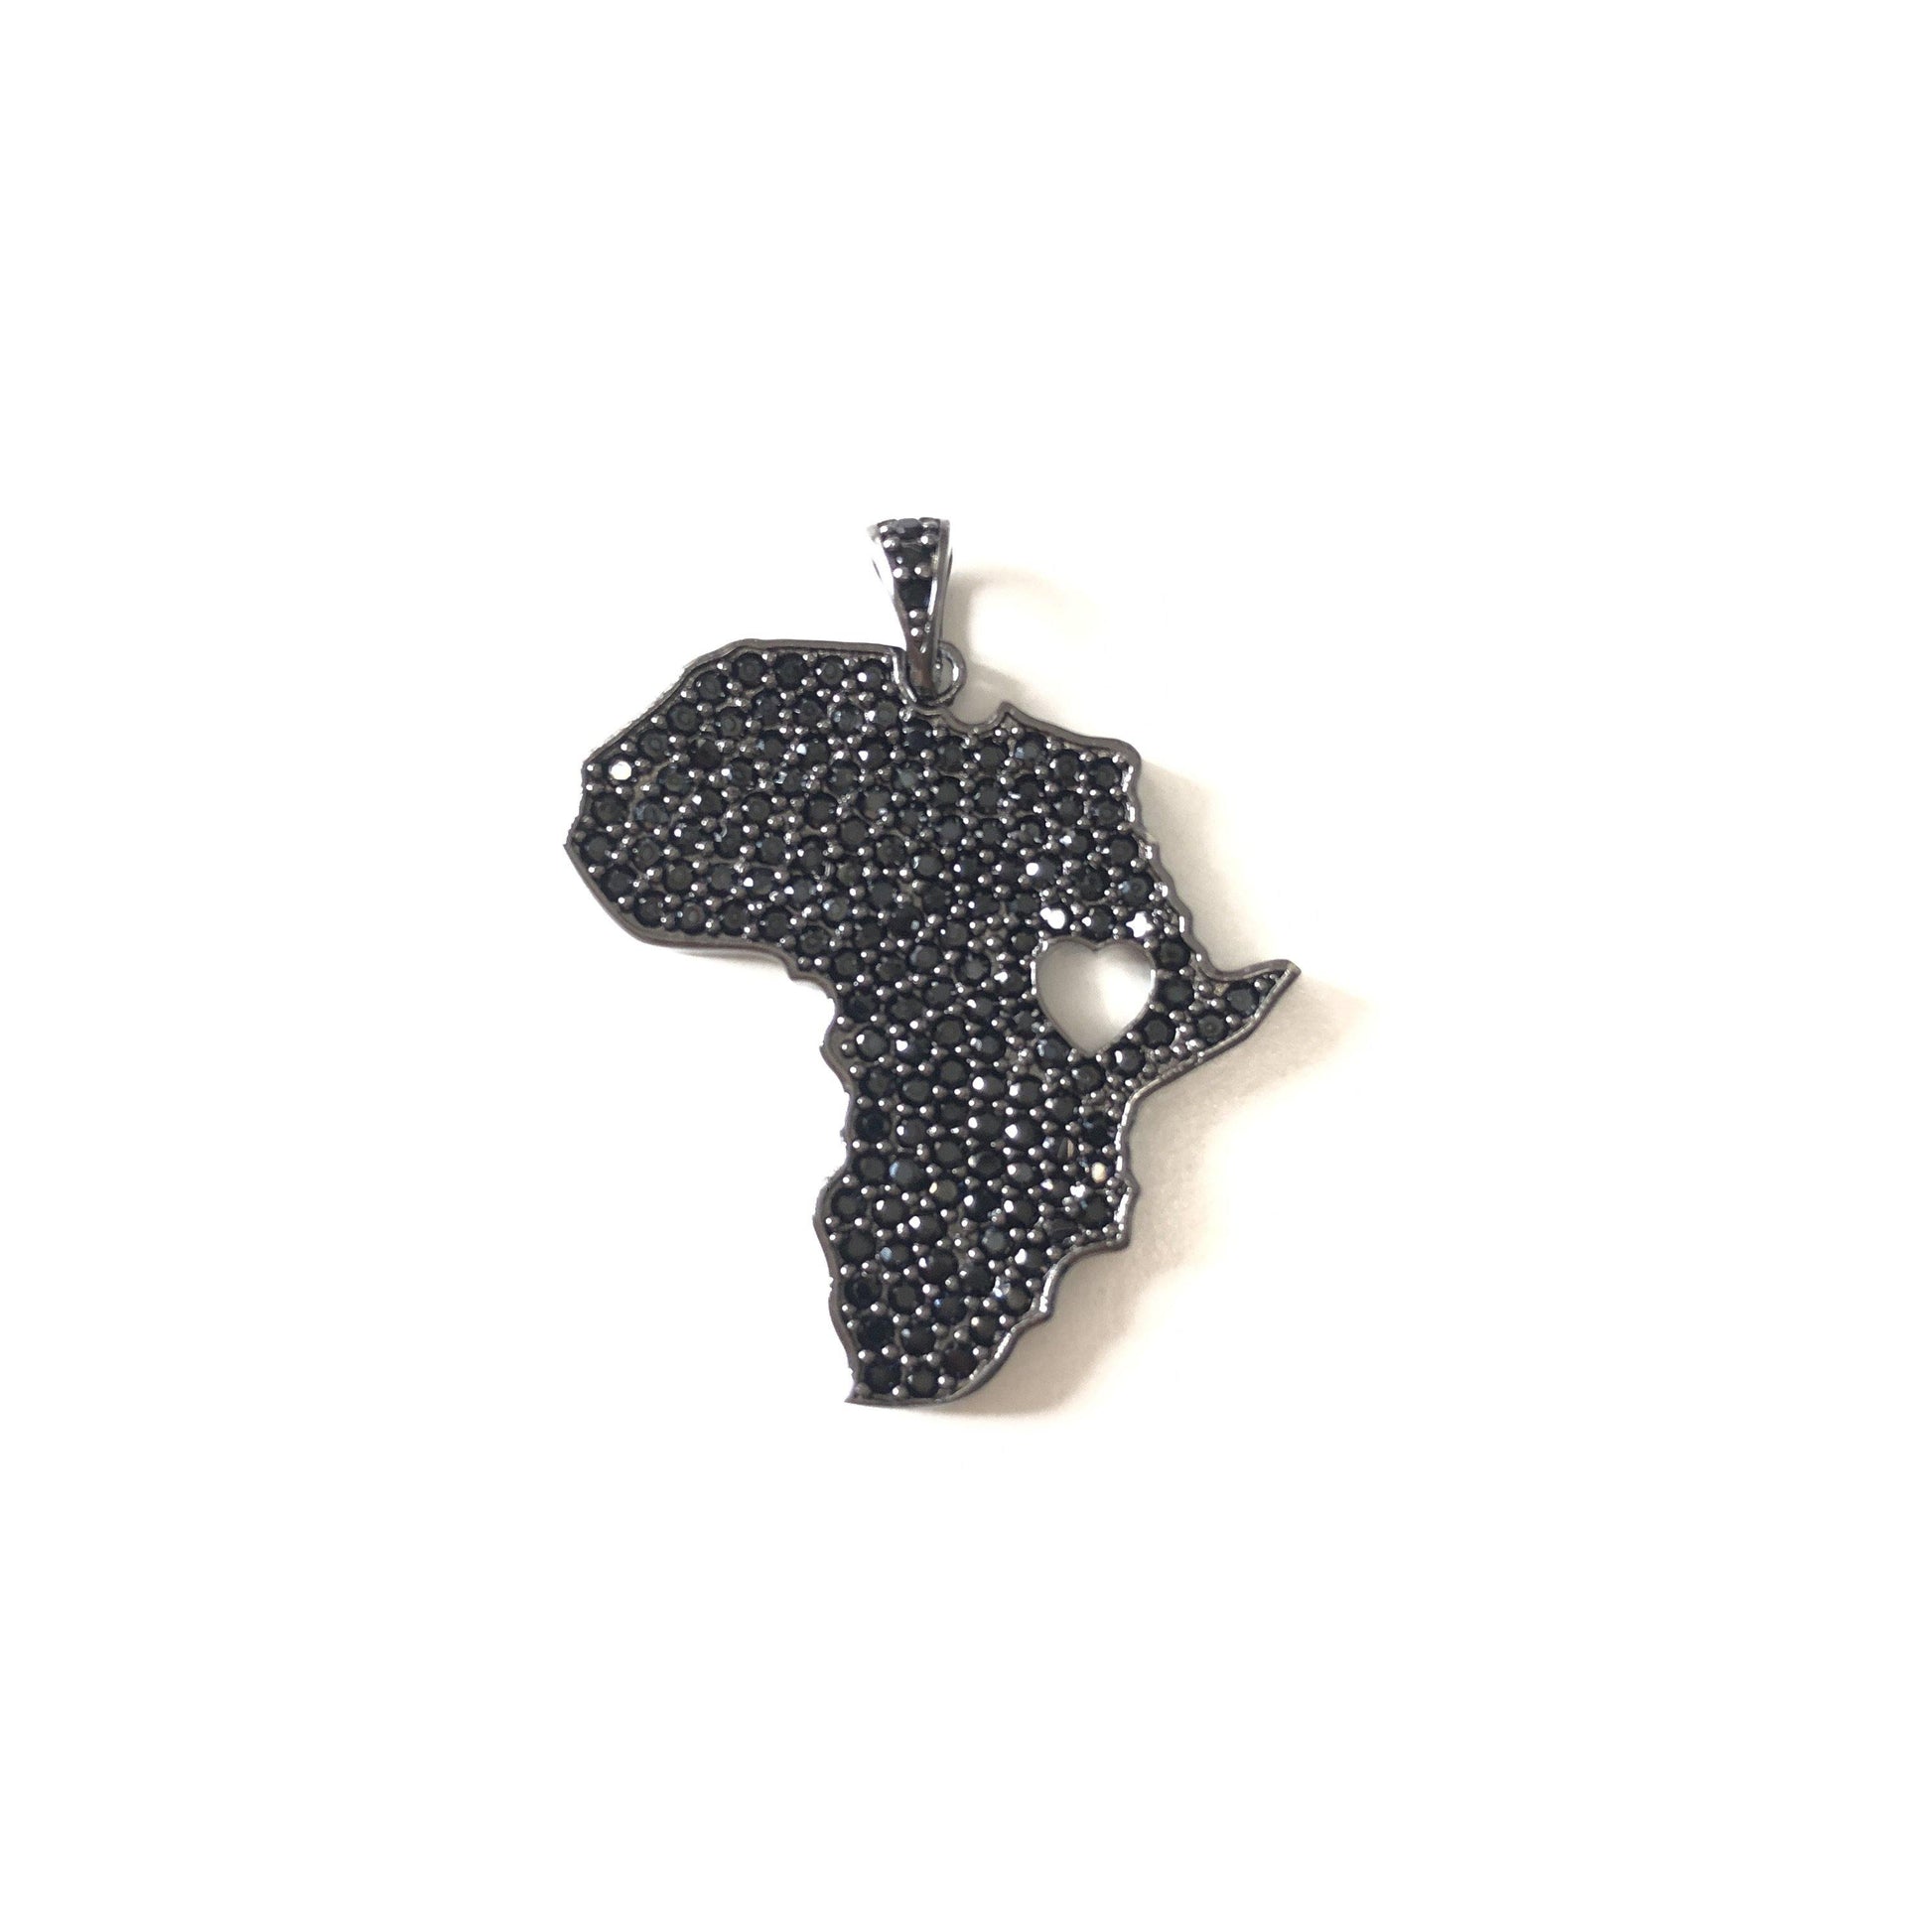 10pcs/lot 35*29mm CZ Paved Love Africa Charms Black History Month Juneteenth Awareness Black on Black CZ Paved Charms Juneteenth & Black History Month Awareness Maps Charms Beads Beyond